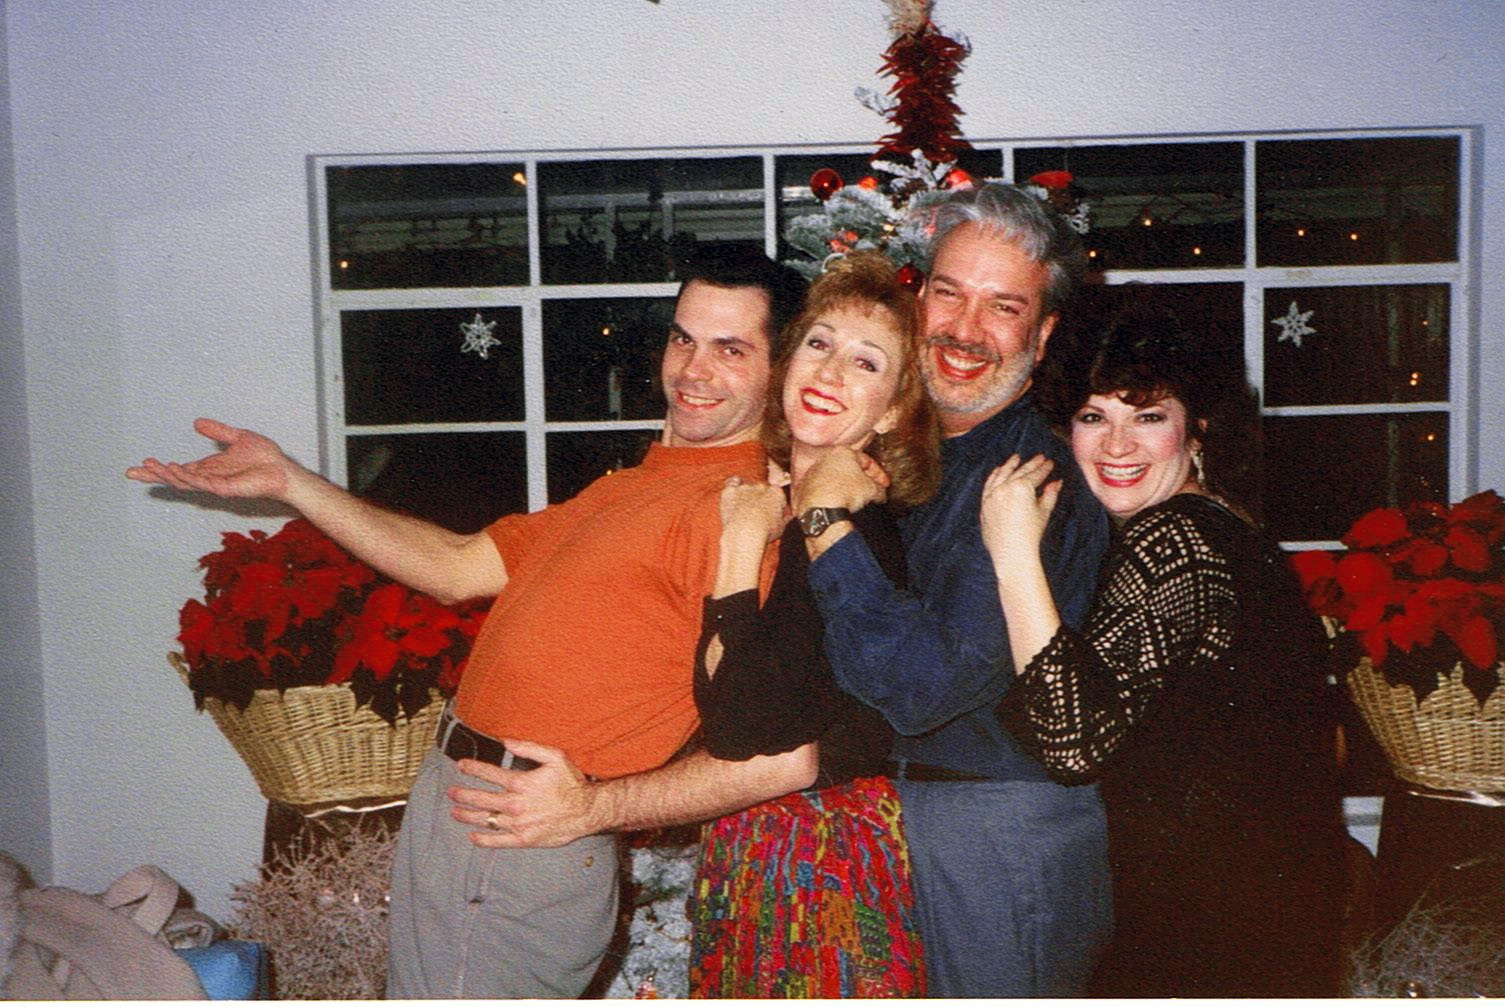 Hamming it up for the camera at a Christmas party back in the day. From left, Bobby Locke (Robert Locke), Linda DeArmond, Jerry Wayne Harkey and Robyn Ferracane.